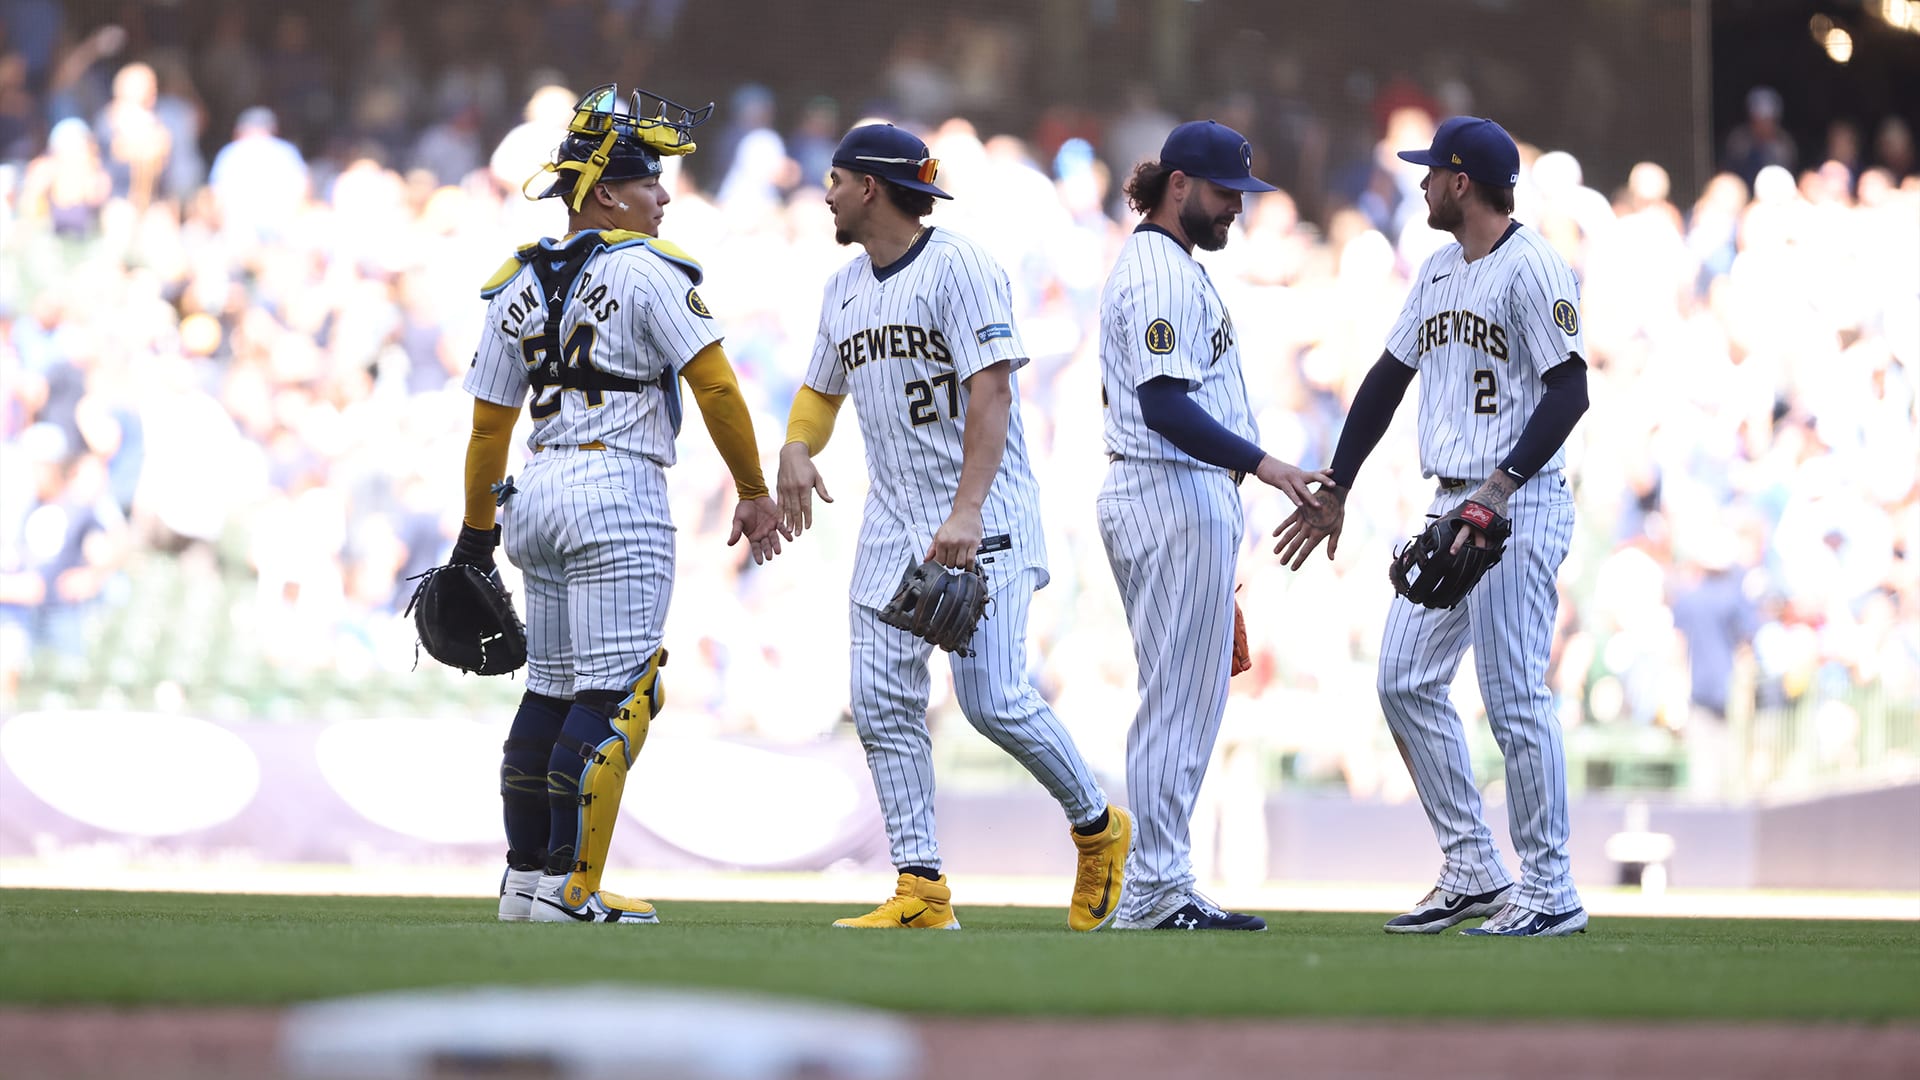 The Brewers celebrate after a victory